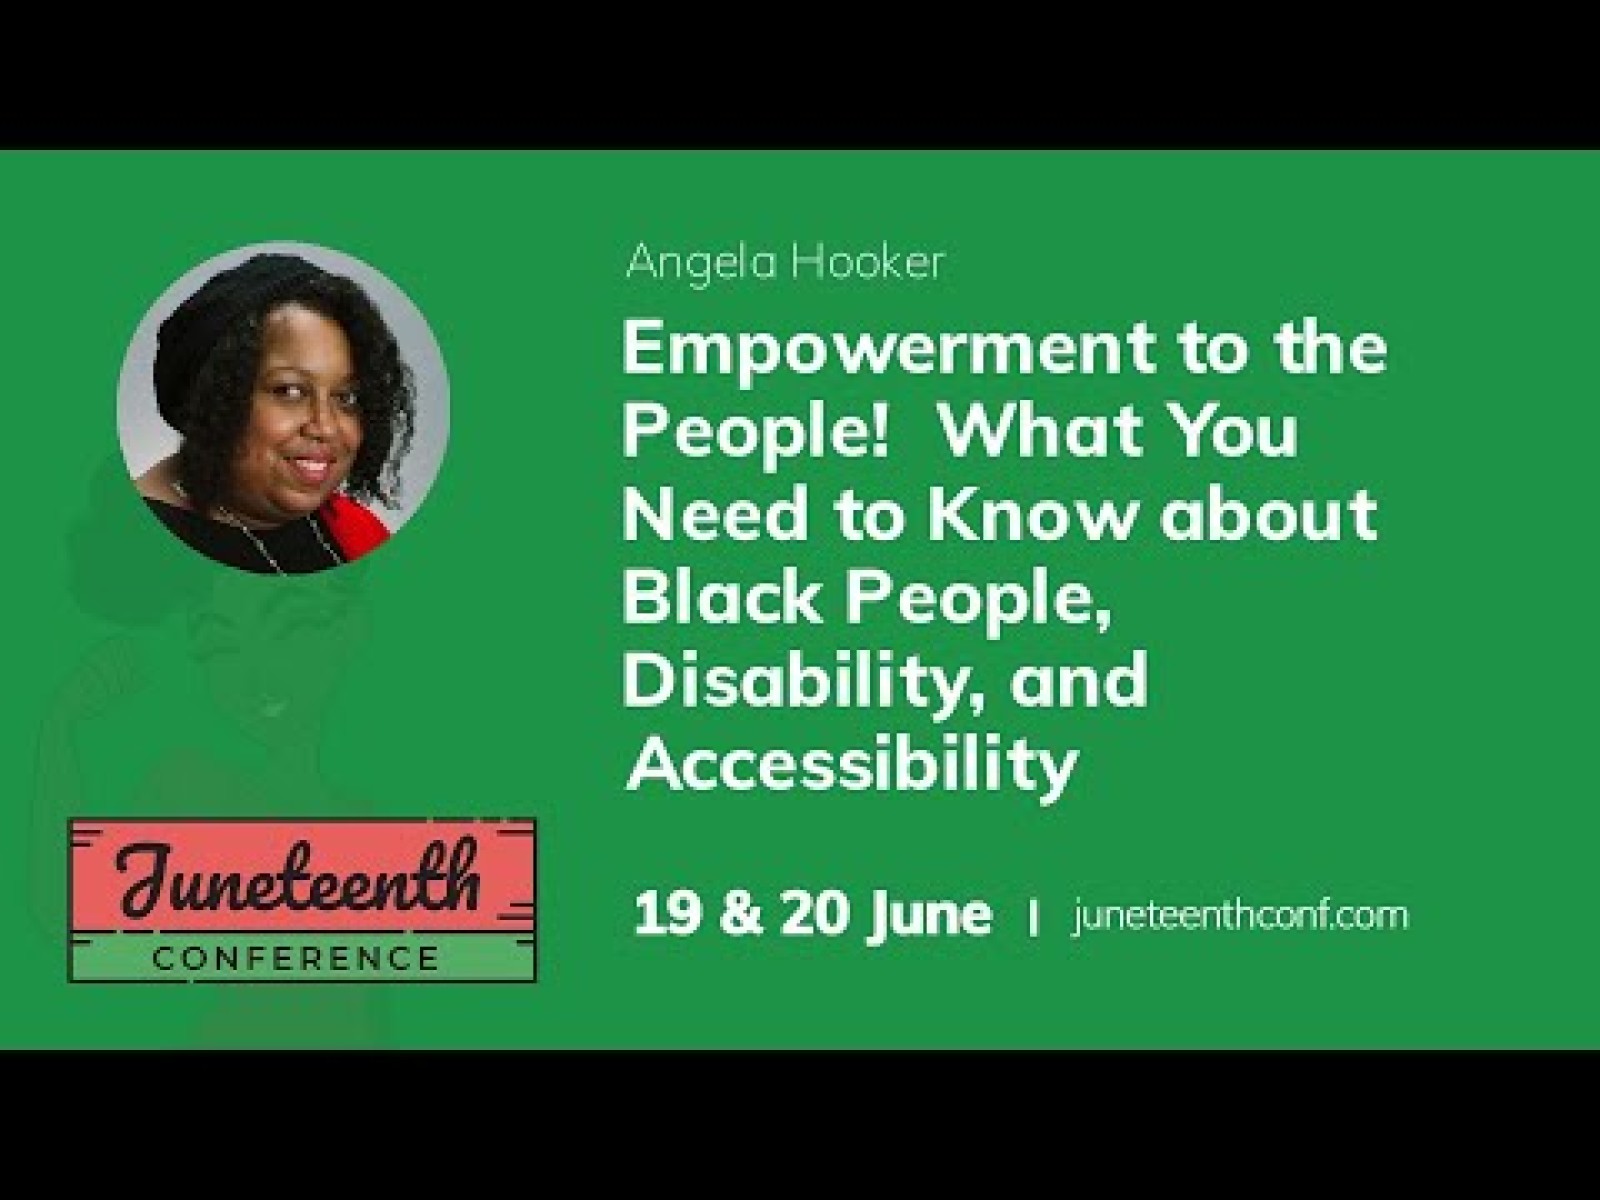 Empowerment to the People! What You Need to Know about Black People, Disability, and Accessibility